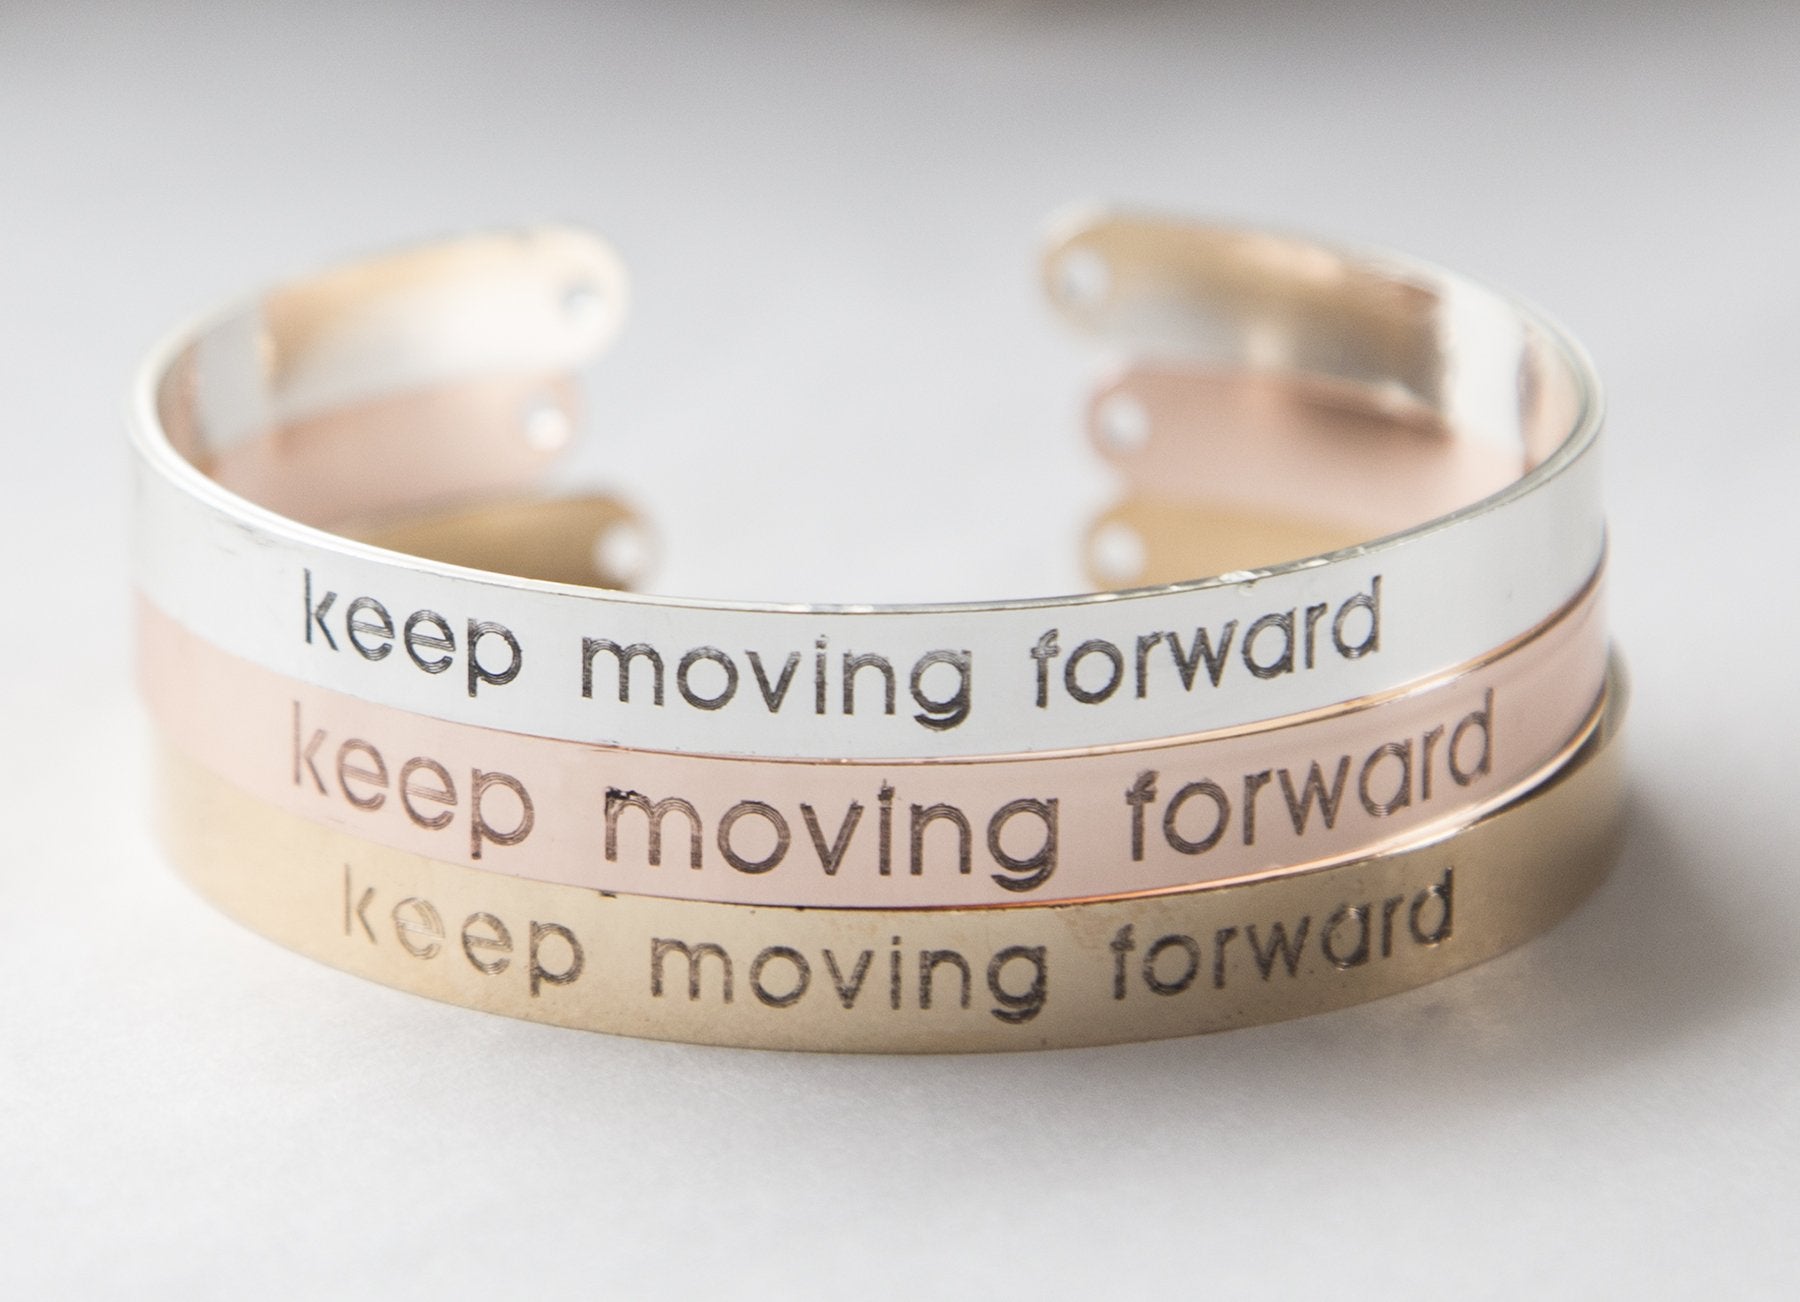 Motivational Keep Moving Forward Engraved Bracelet - Adjustable Copper with Gold, Rose Gold or Silver Plating - 6mm Wide, 16cm Long - Fast Shipping

Keywords: motivational bracelet, engraved bracelet, keep moving forward, adjustable bracelet, copper - Jewelry & Watches - Bijou Her -  -  - 